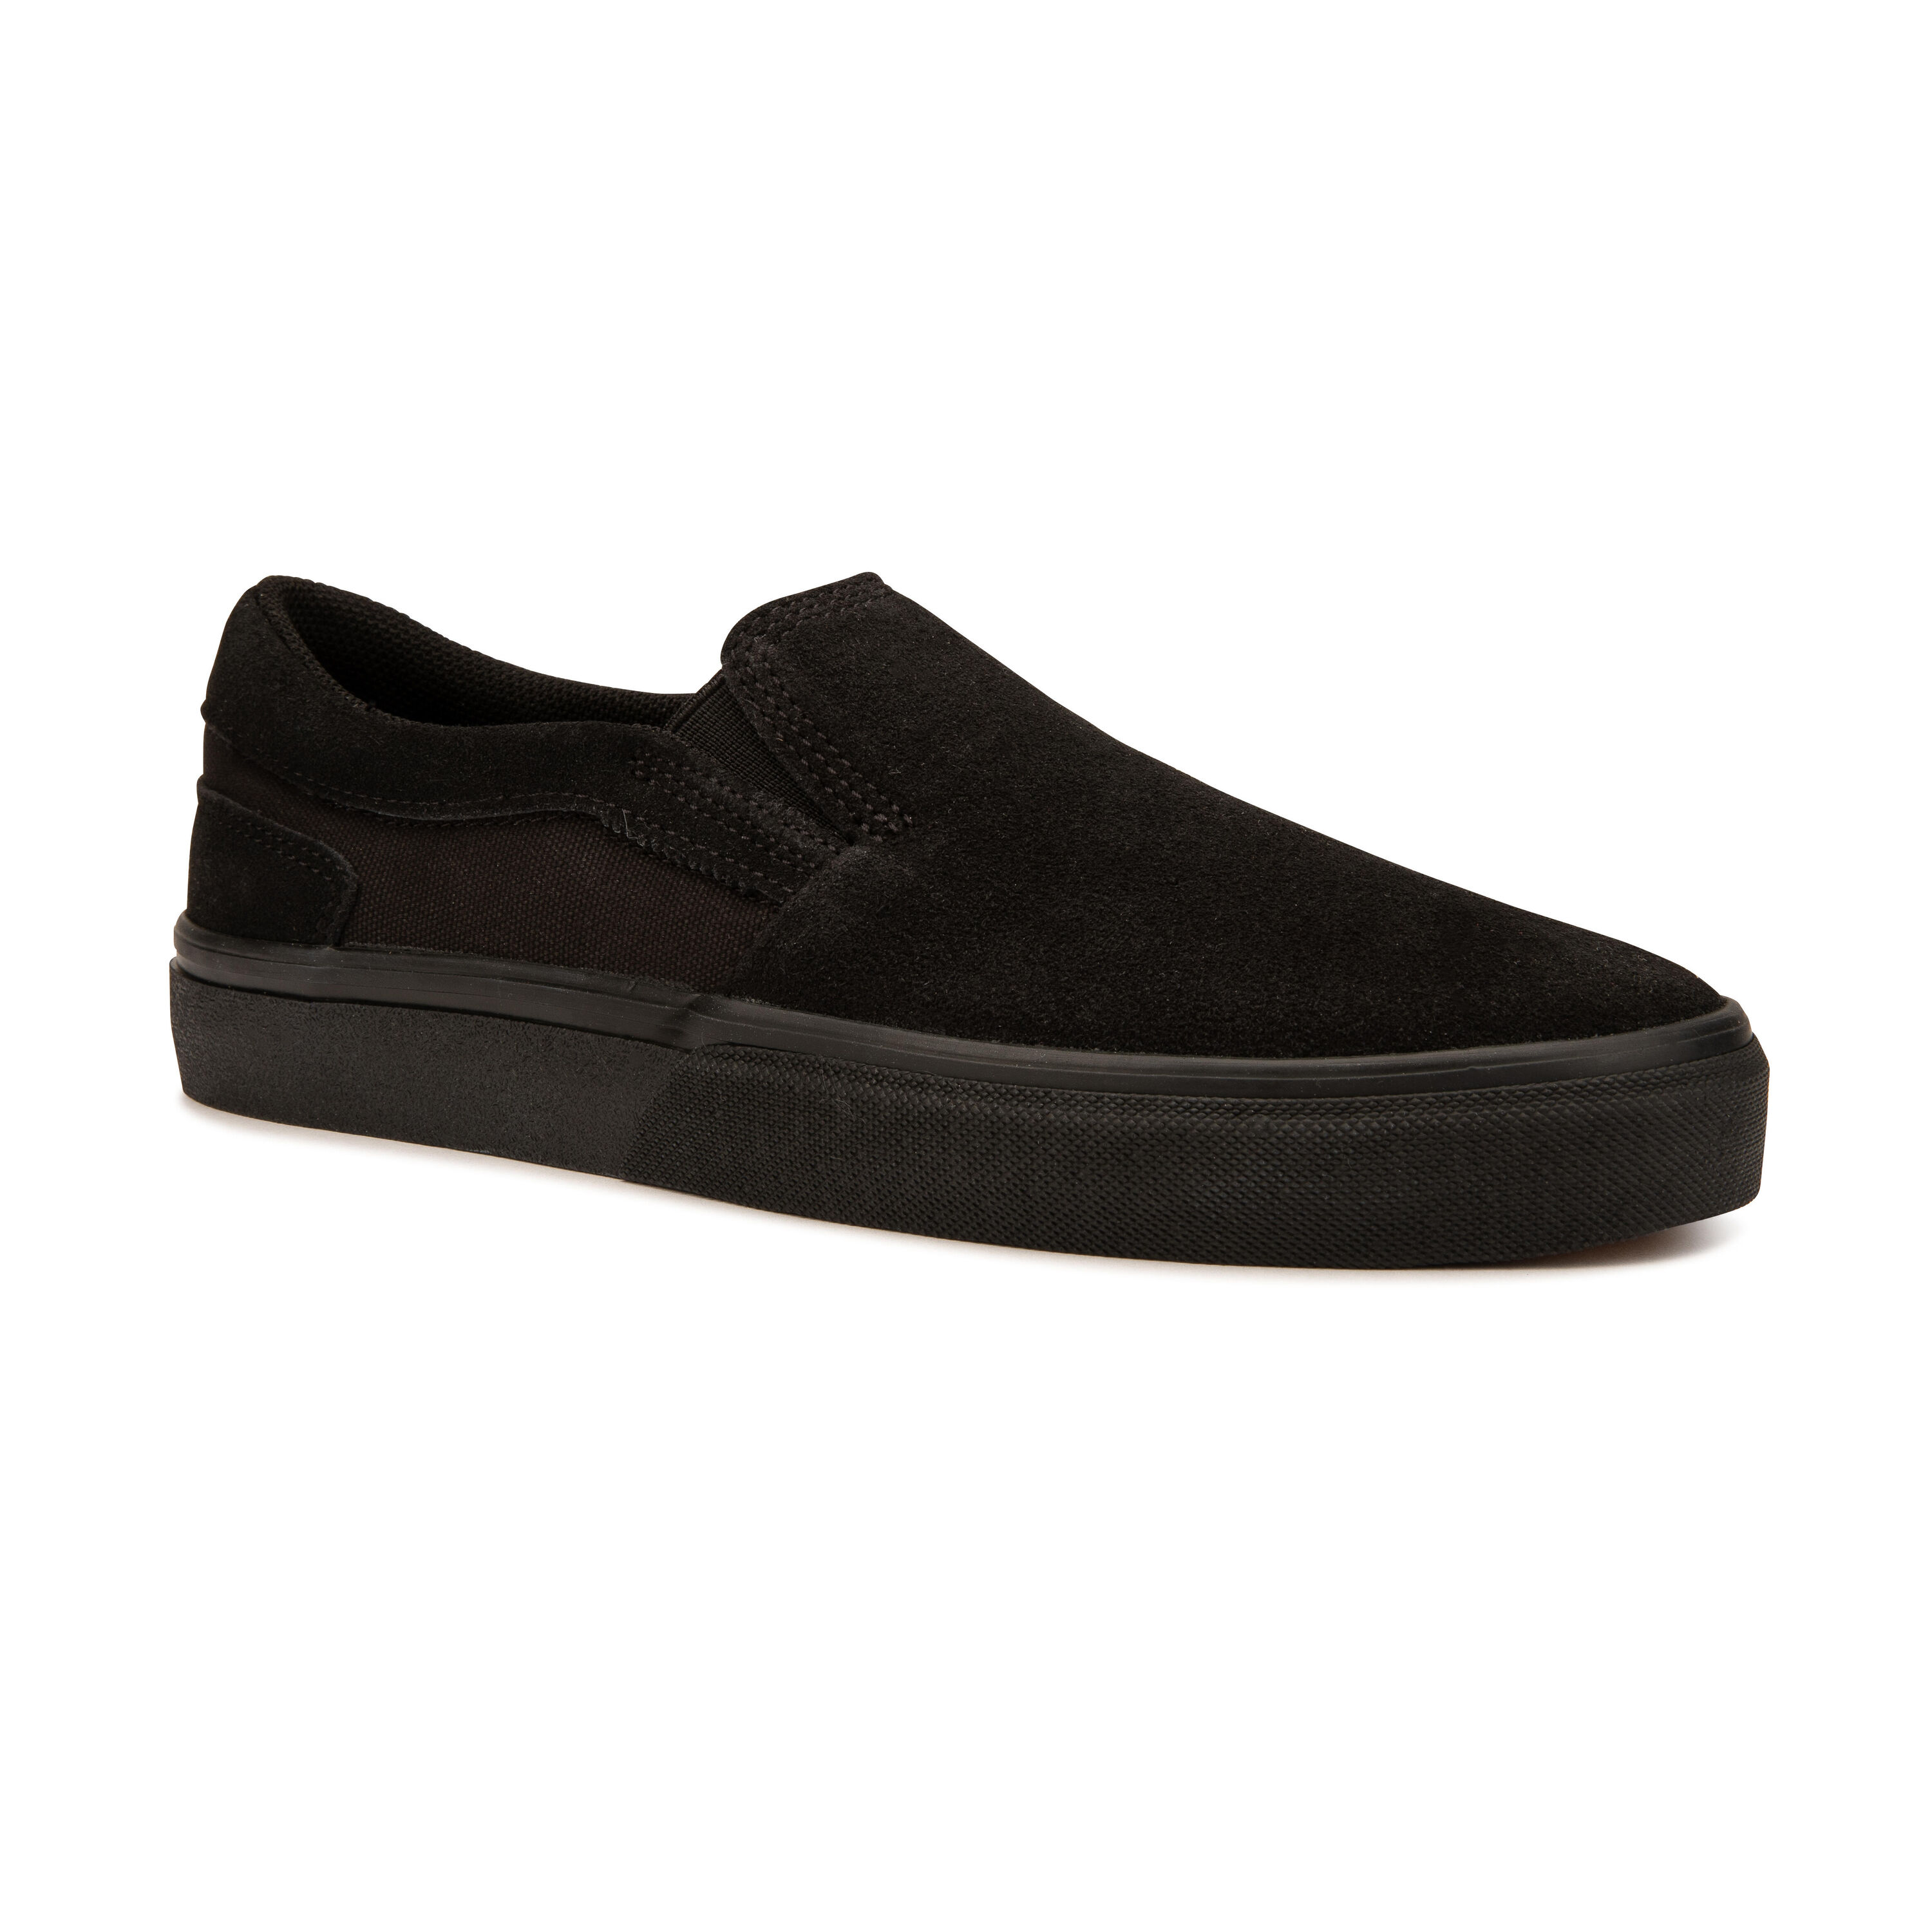 OXELO Adult Low-Top Slip-On Skate Shoes Without Laces Vulca 500 - Black